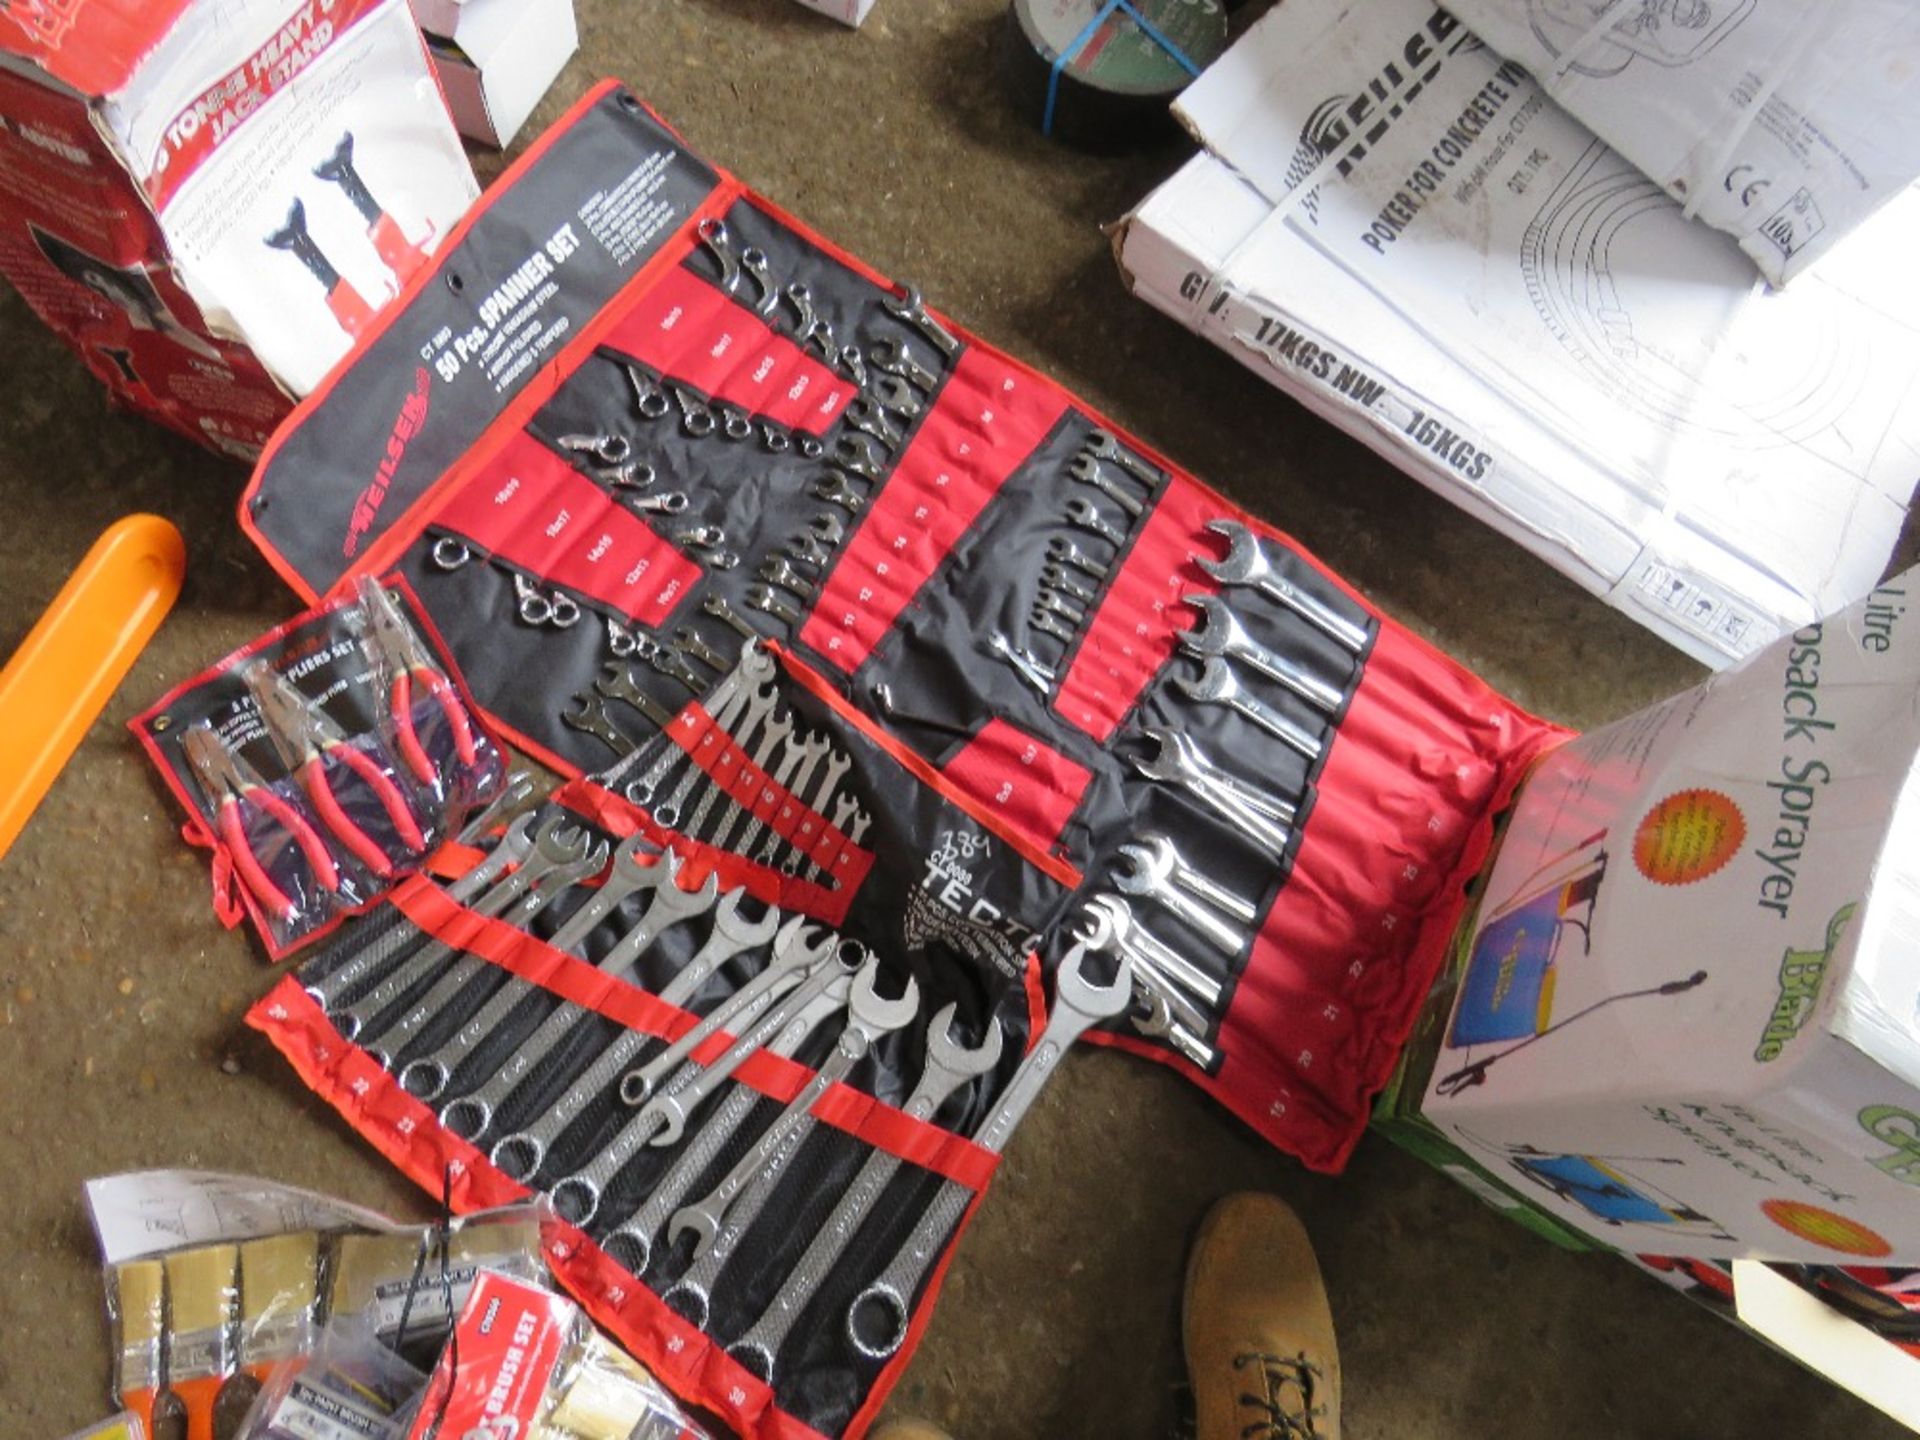 2 X SETS OF SPANNERS PLUS 3 X PLIERS. - Image 2 of 3